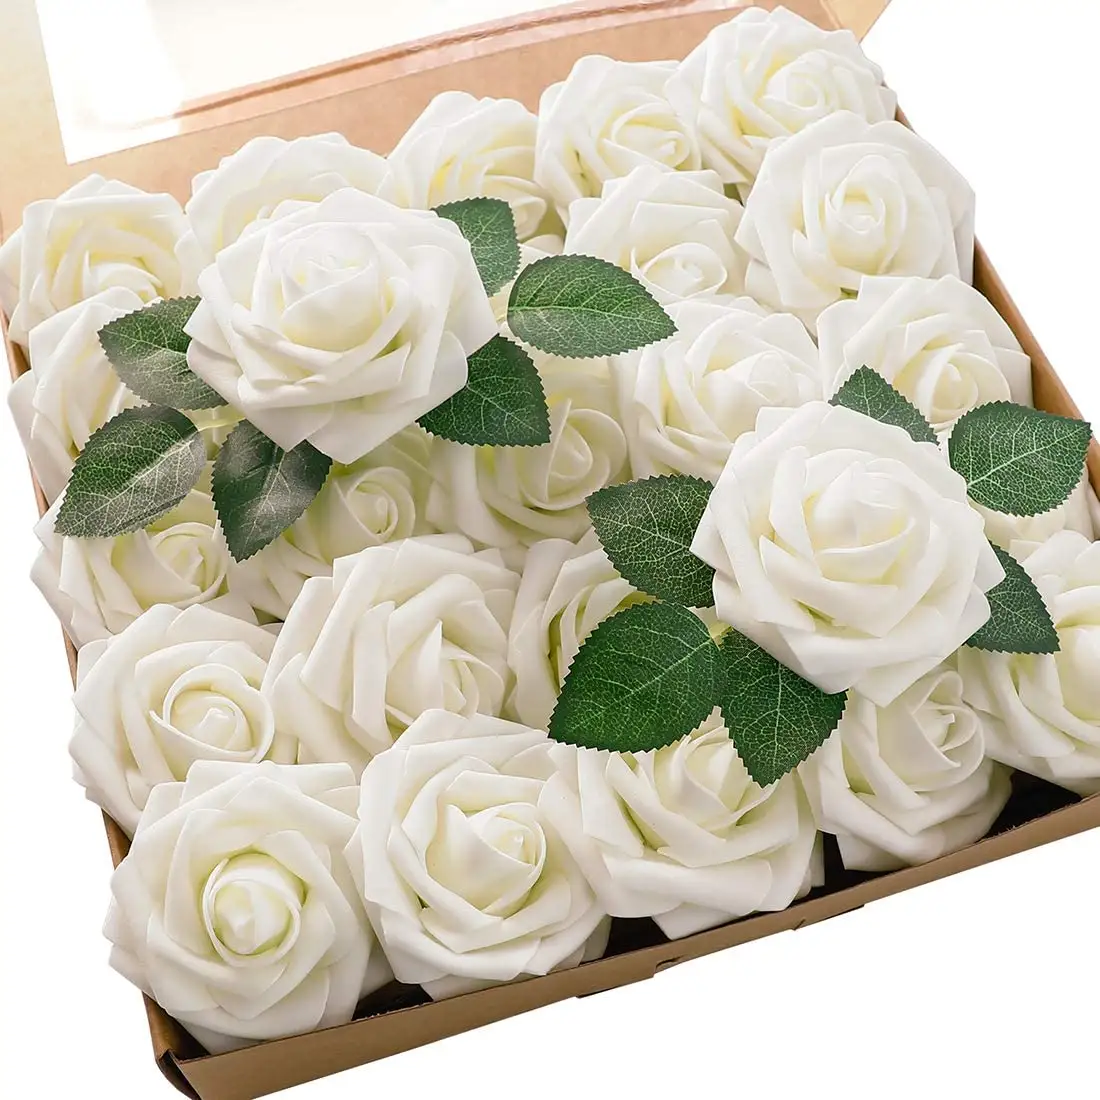 INUNION Artificial Flowers 25pcs Real Looking Foam PE Roses With Stems For Wedding Bouquets Bridal Shower Centerpieces